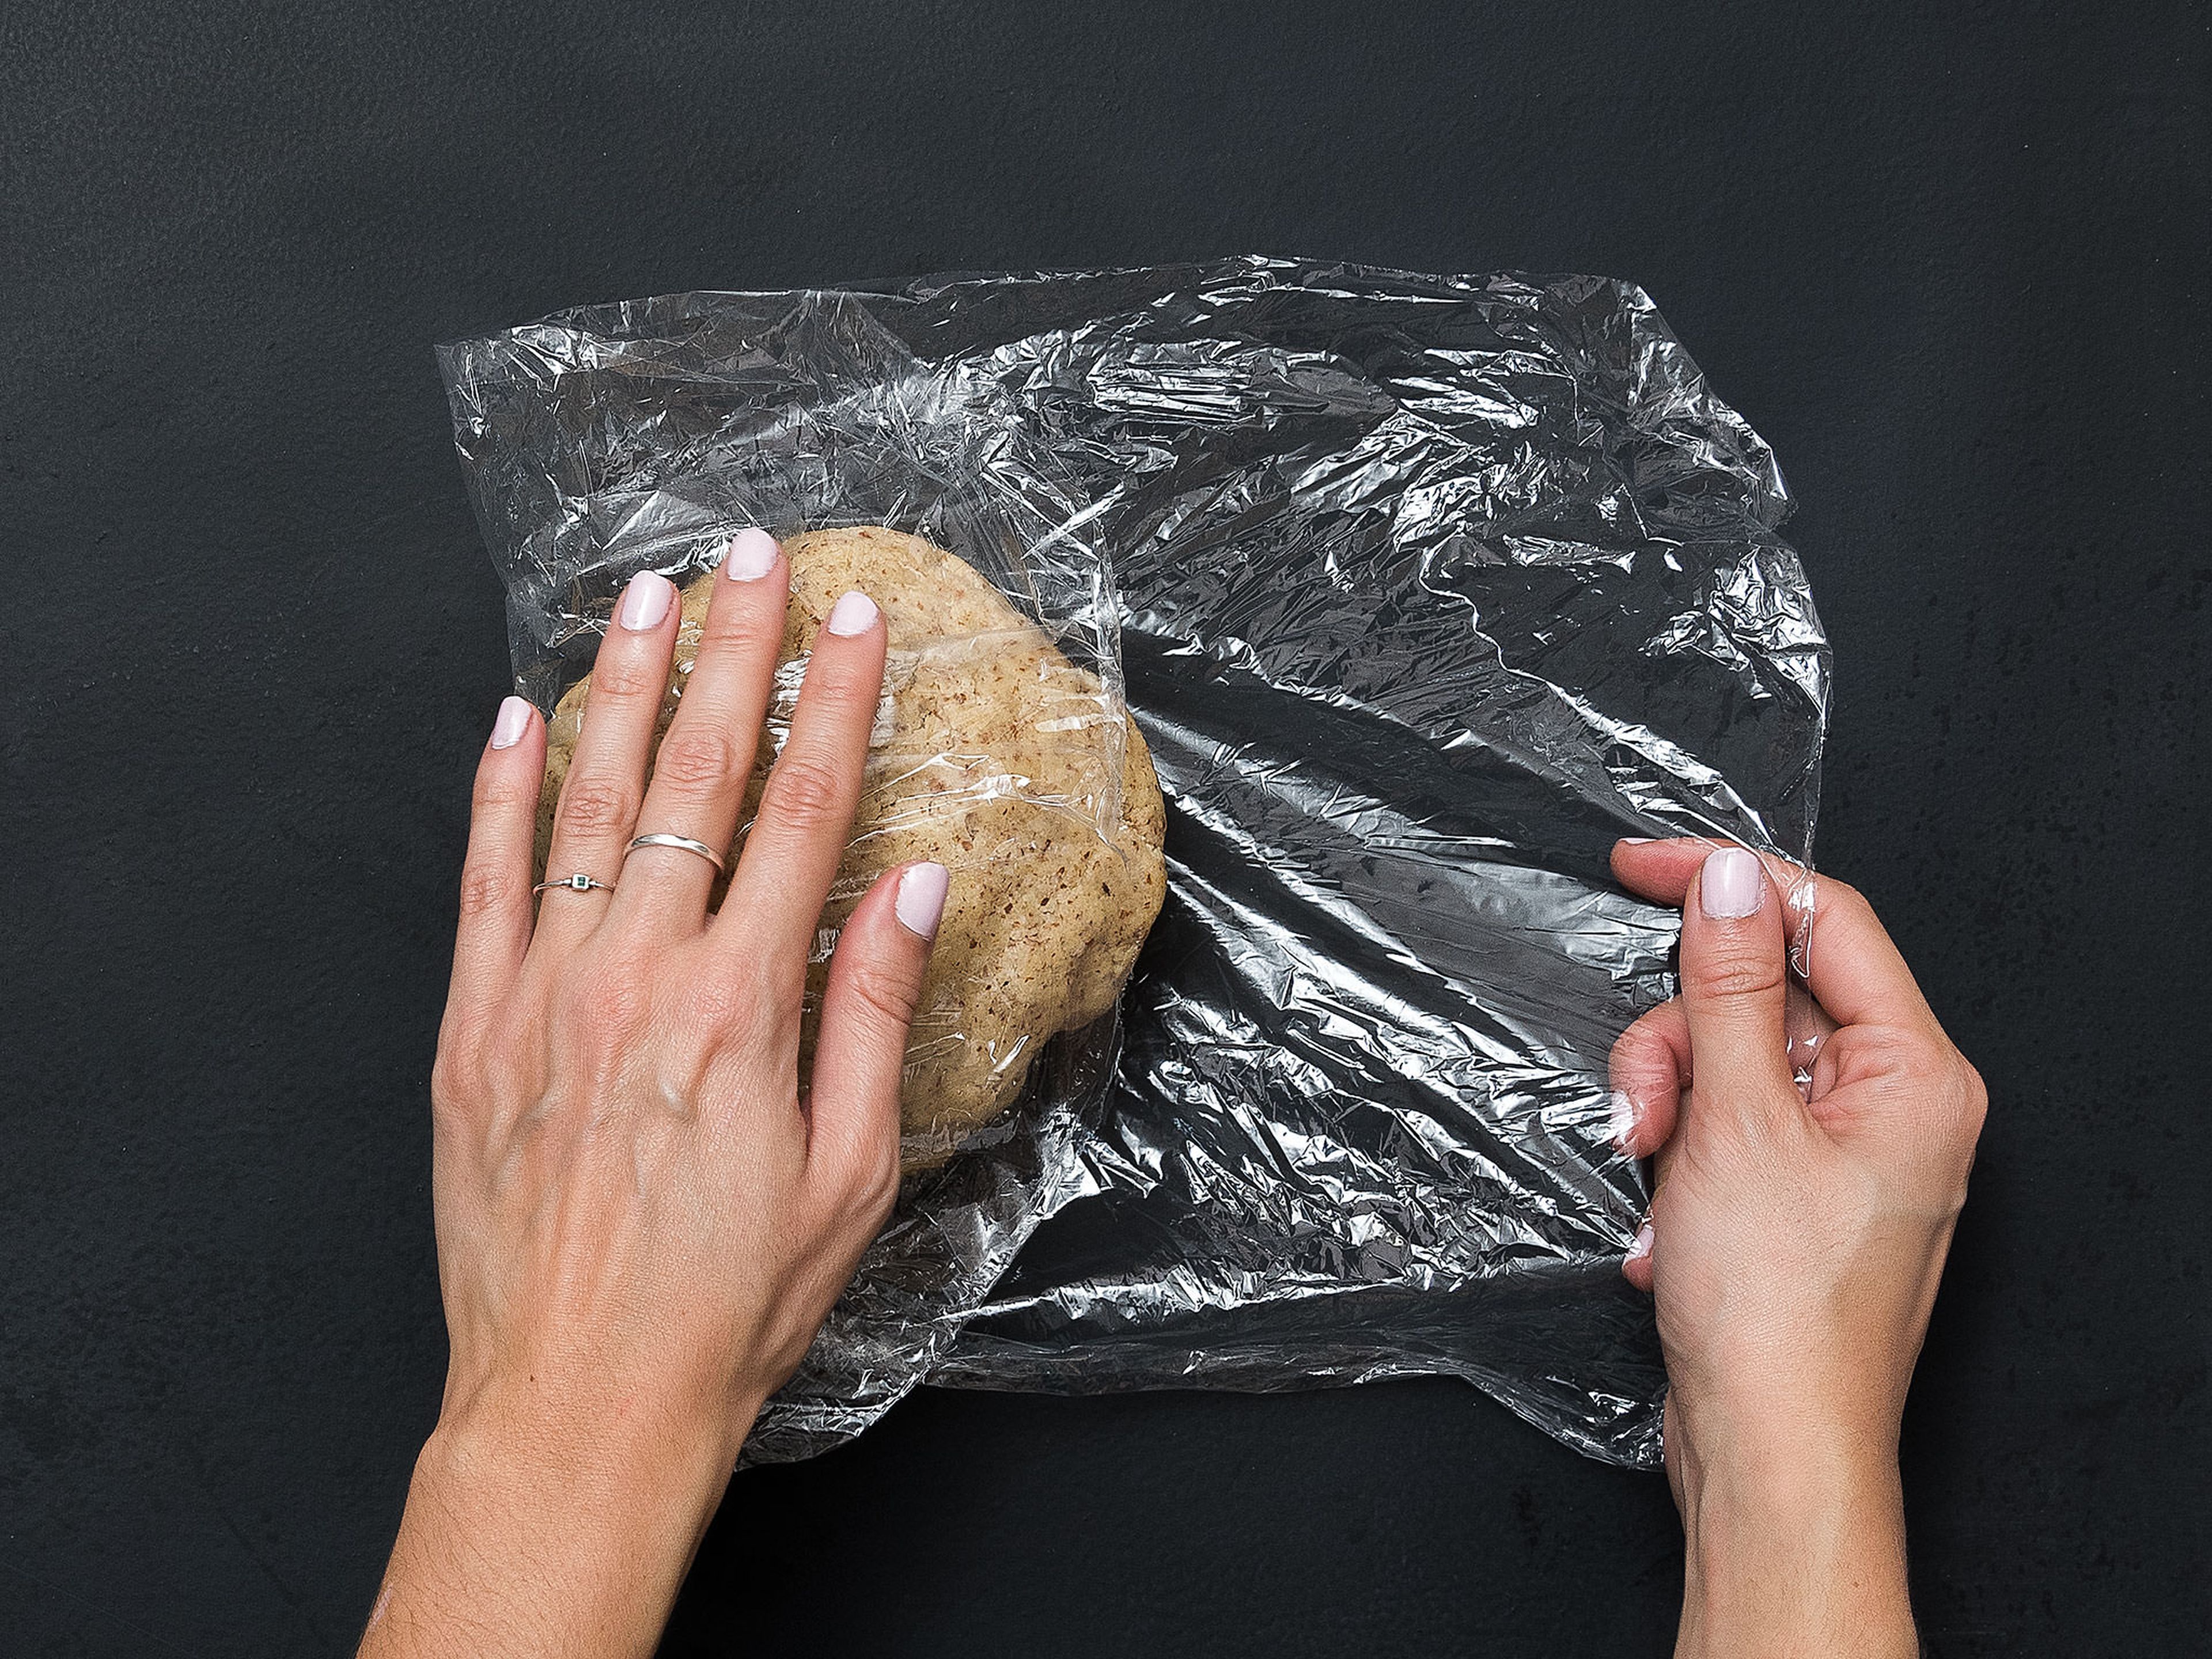 Form dough into a ball, wrap in plastic wrap, and place in the fridge for approx. 30 min.